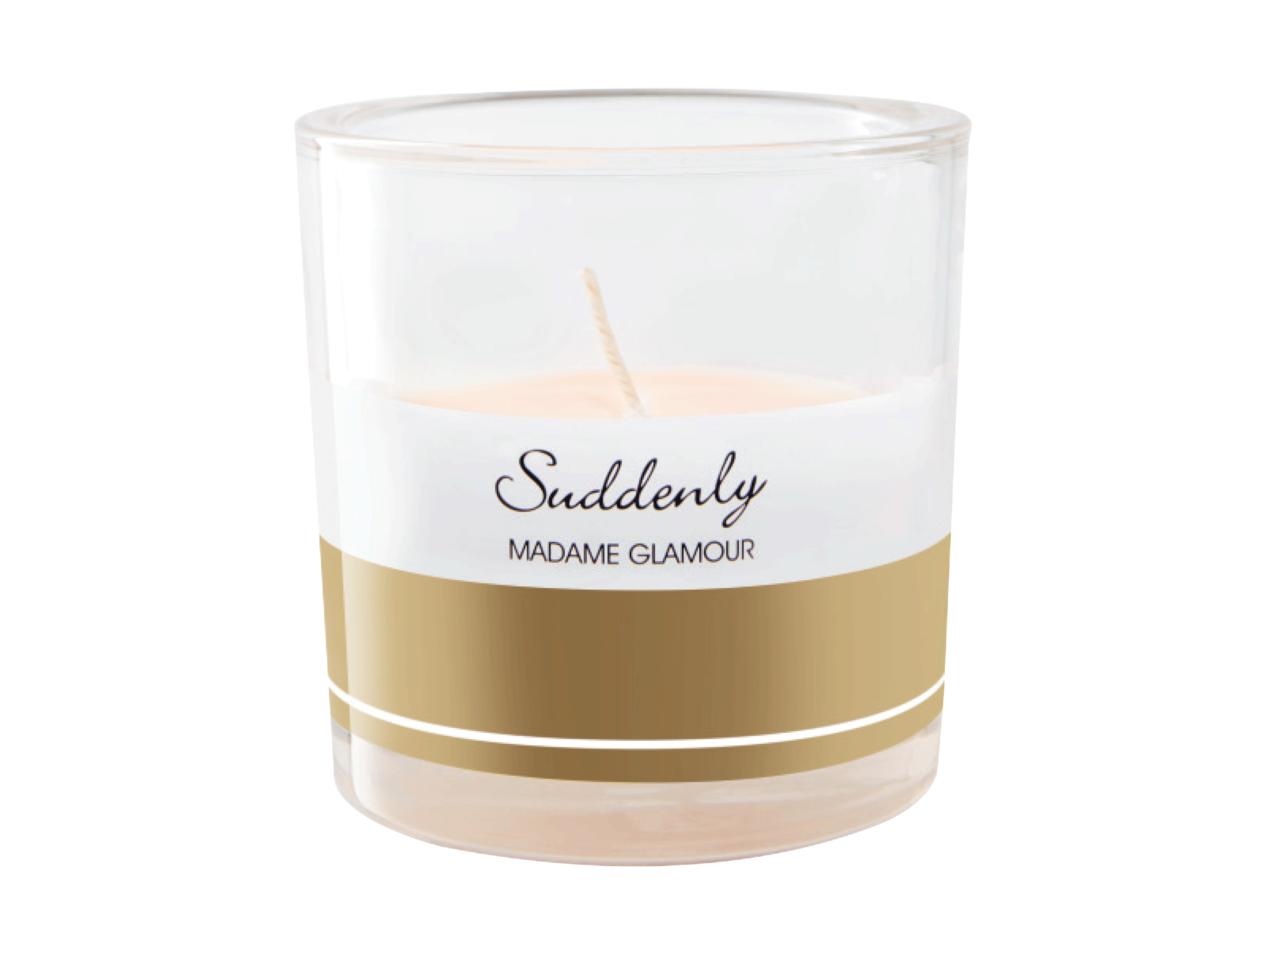 SUDDENLY Madame Glamour Scented Candle